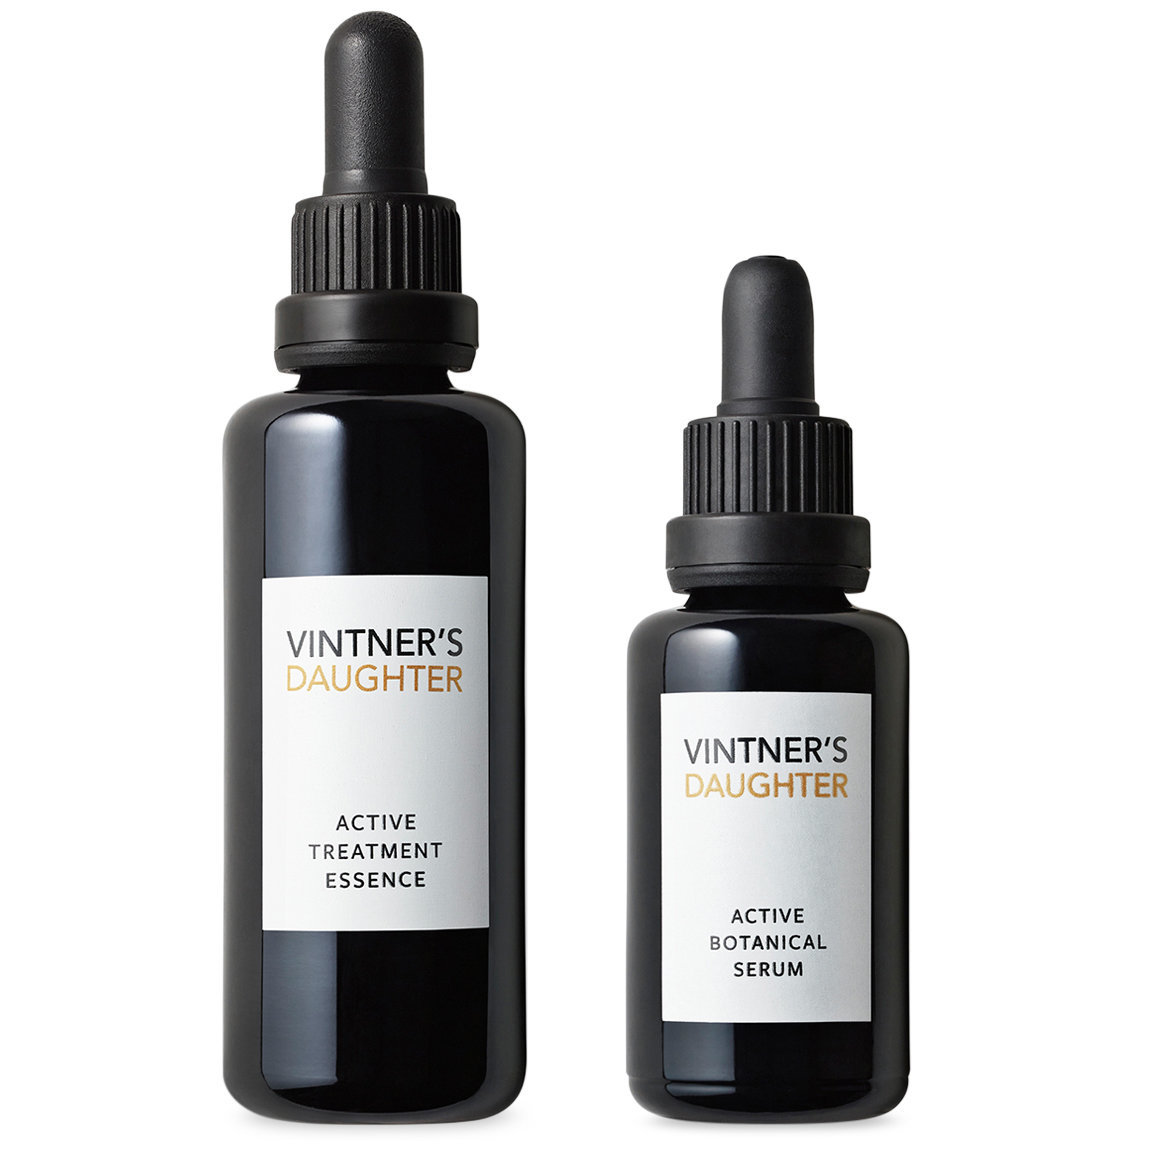 Vintner's Daughter Active Botancial Serum and Treatment Essence Bundle alternative view 1 - product swatch.